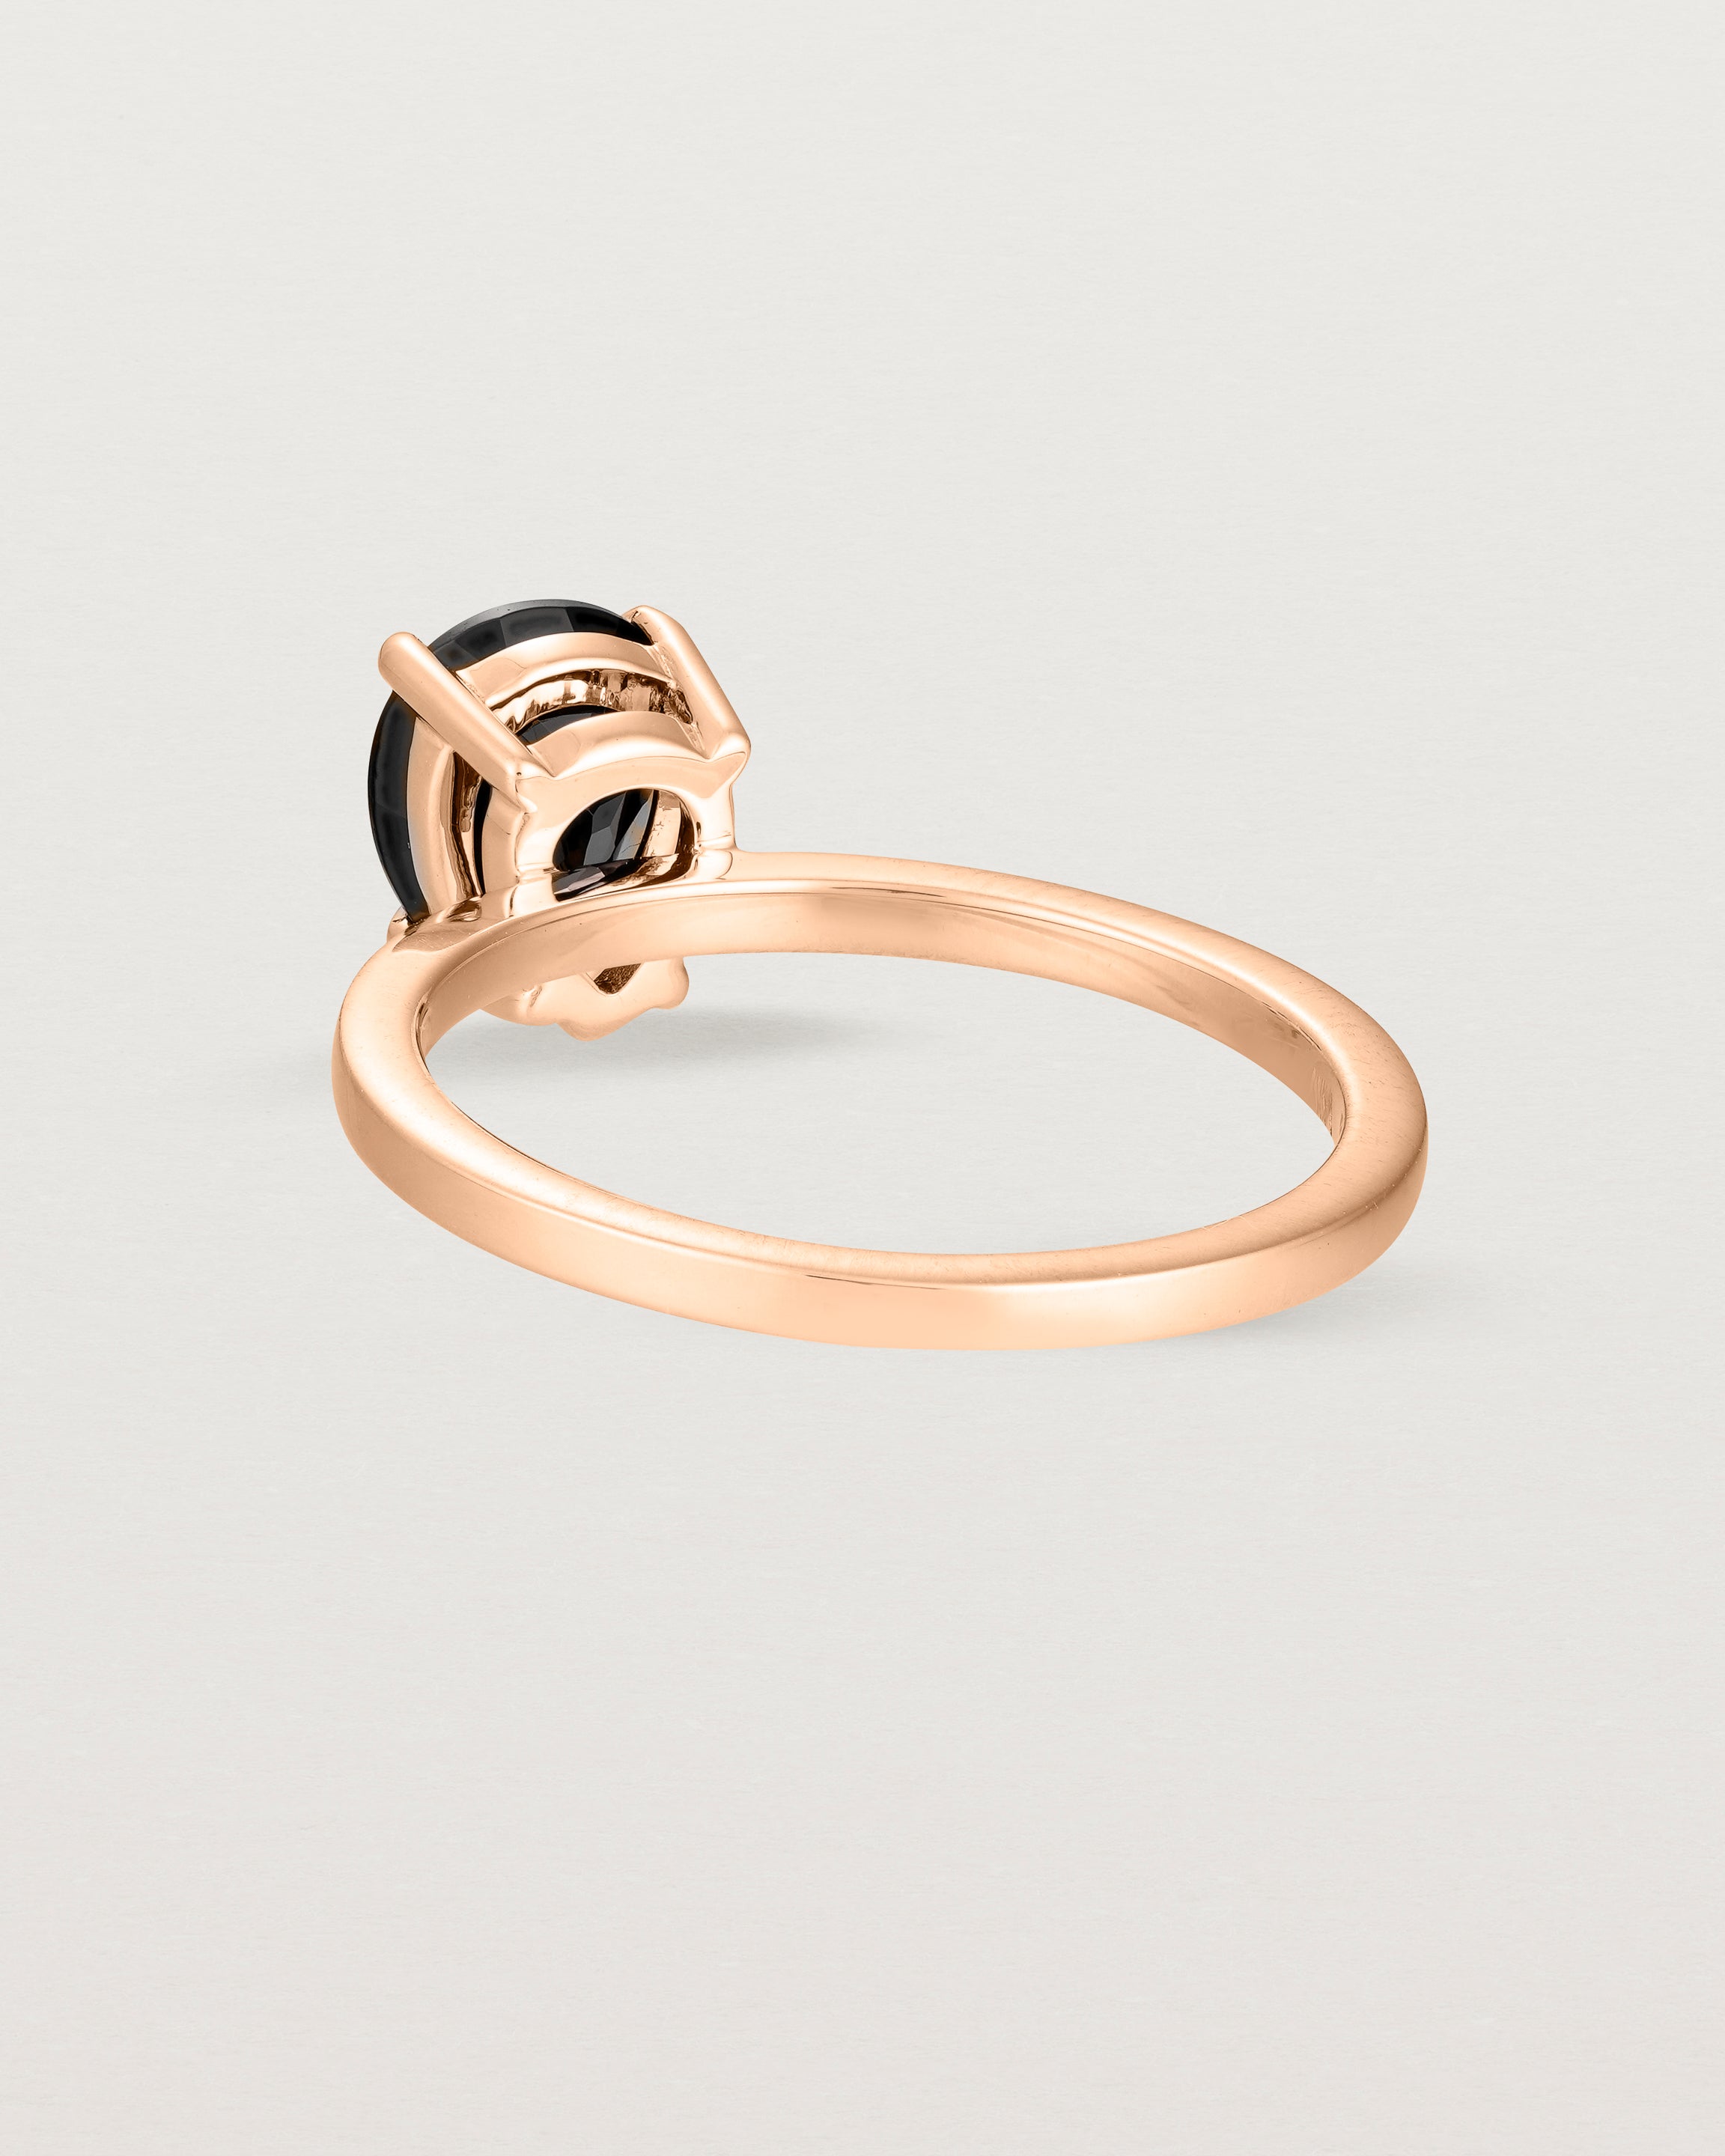 Back view of the Una Pear Solitaire | Black Spinel | Rose Gold.